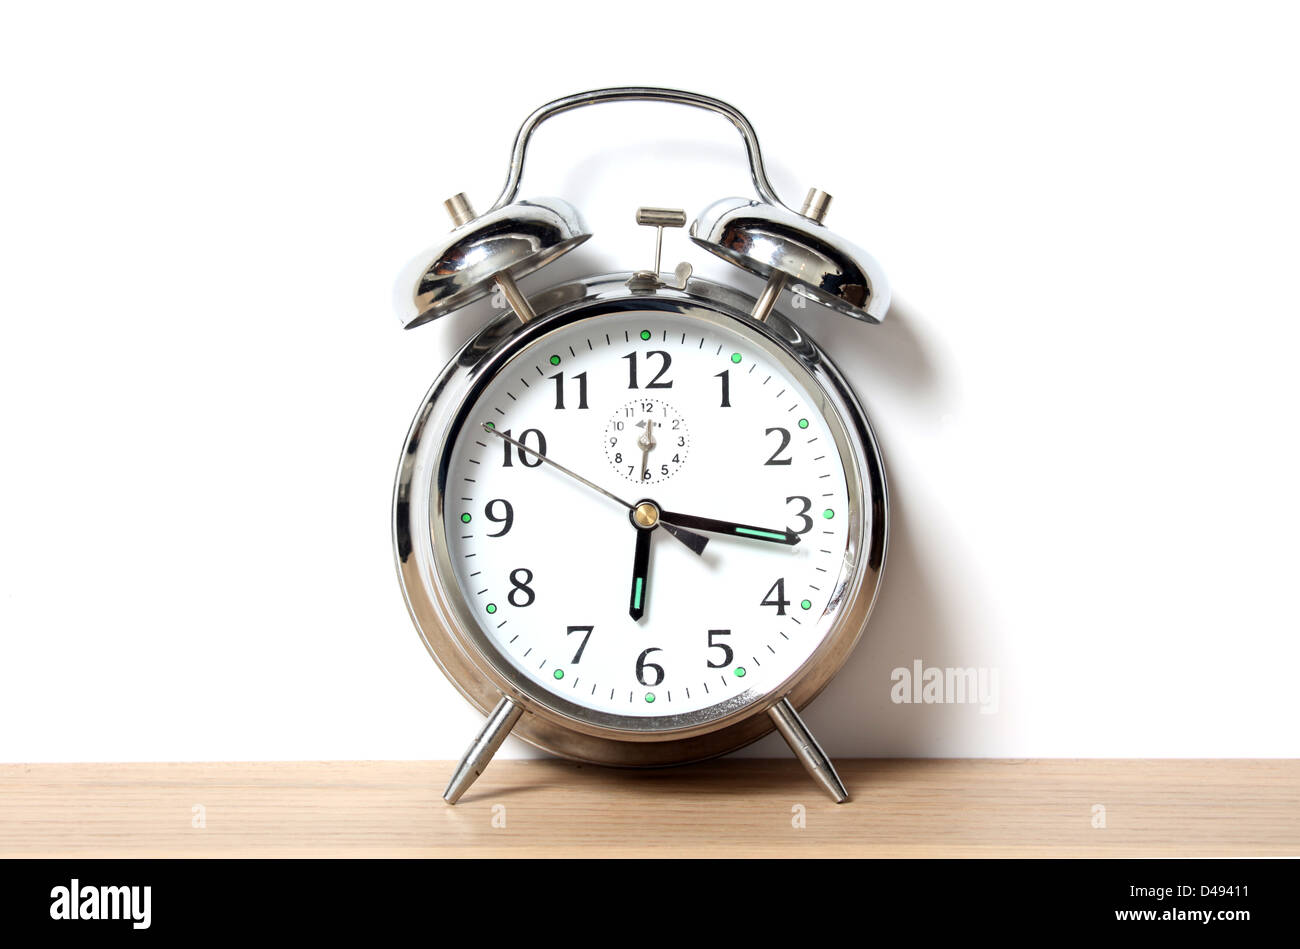 Chrome alarm clock with bells on, set just before 6-15 Stock Photo